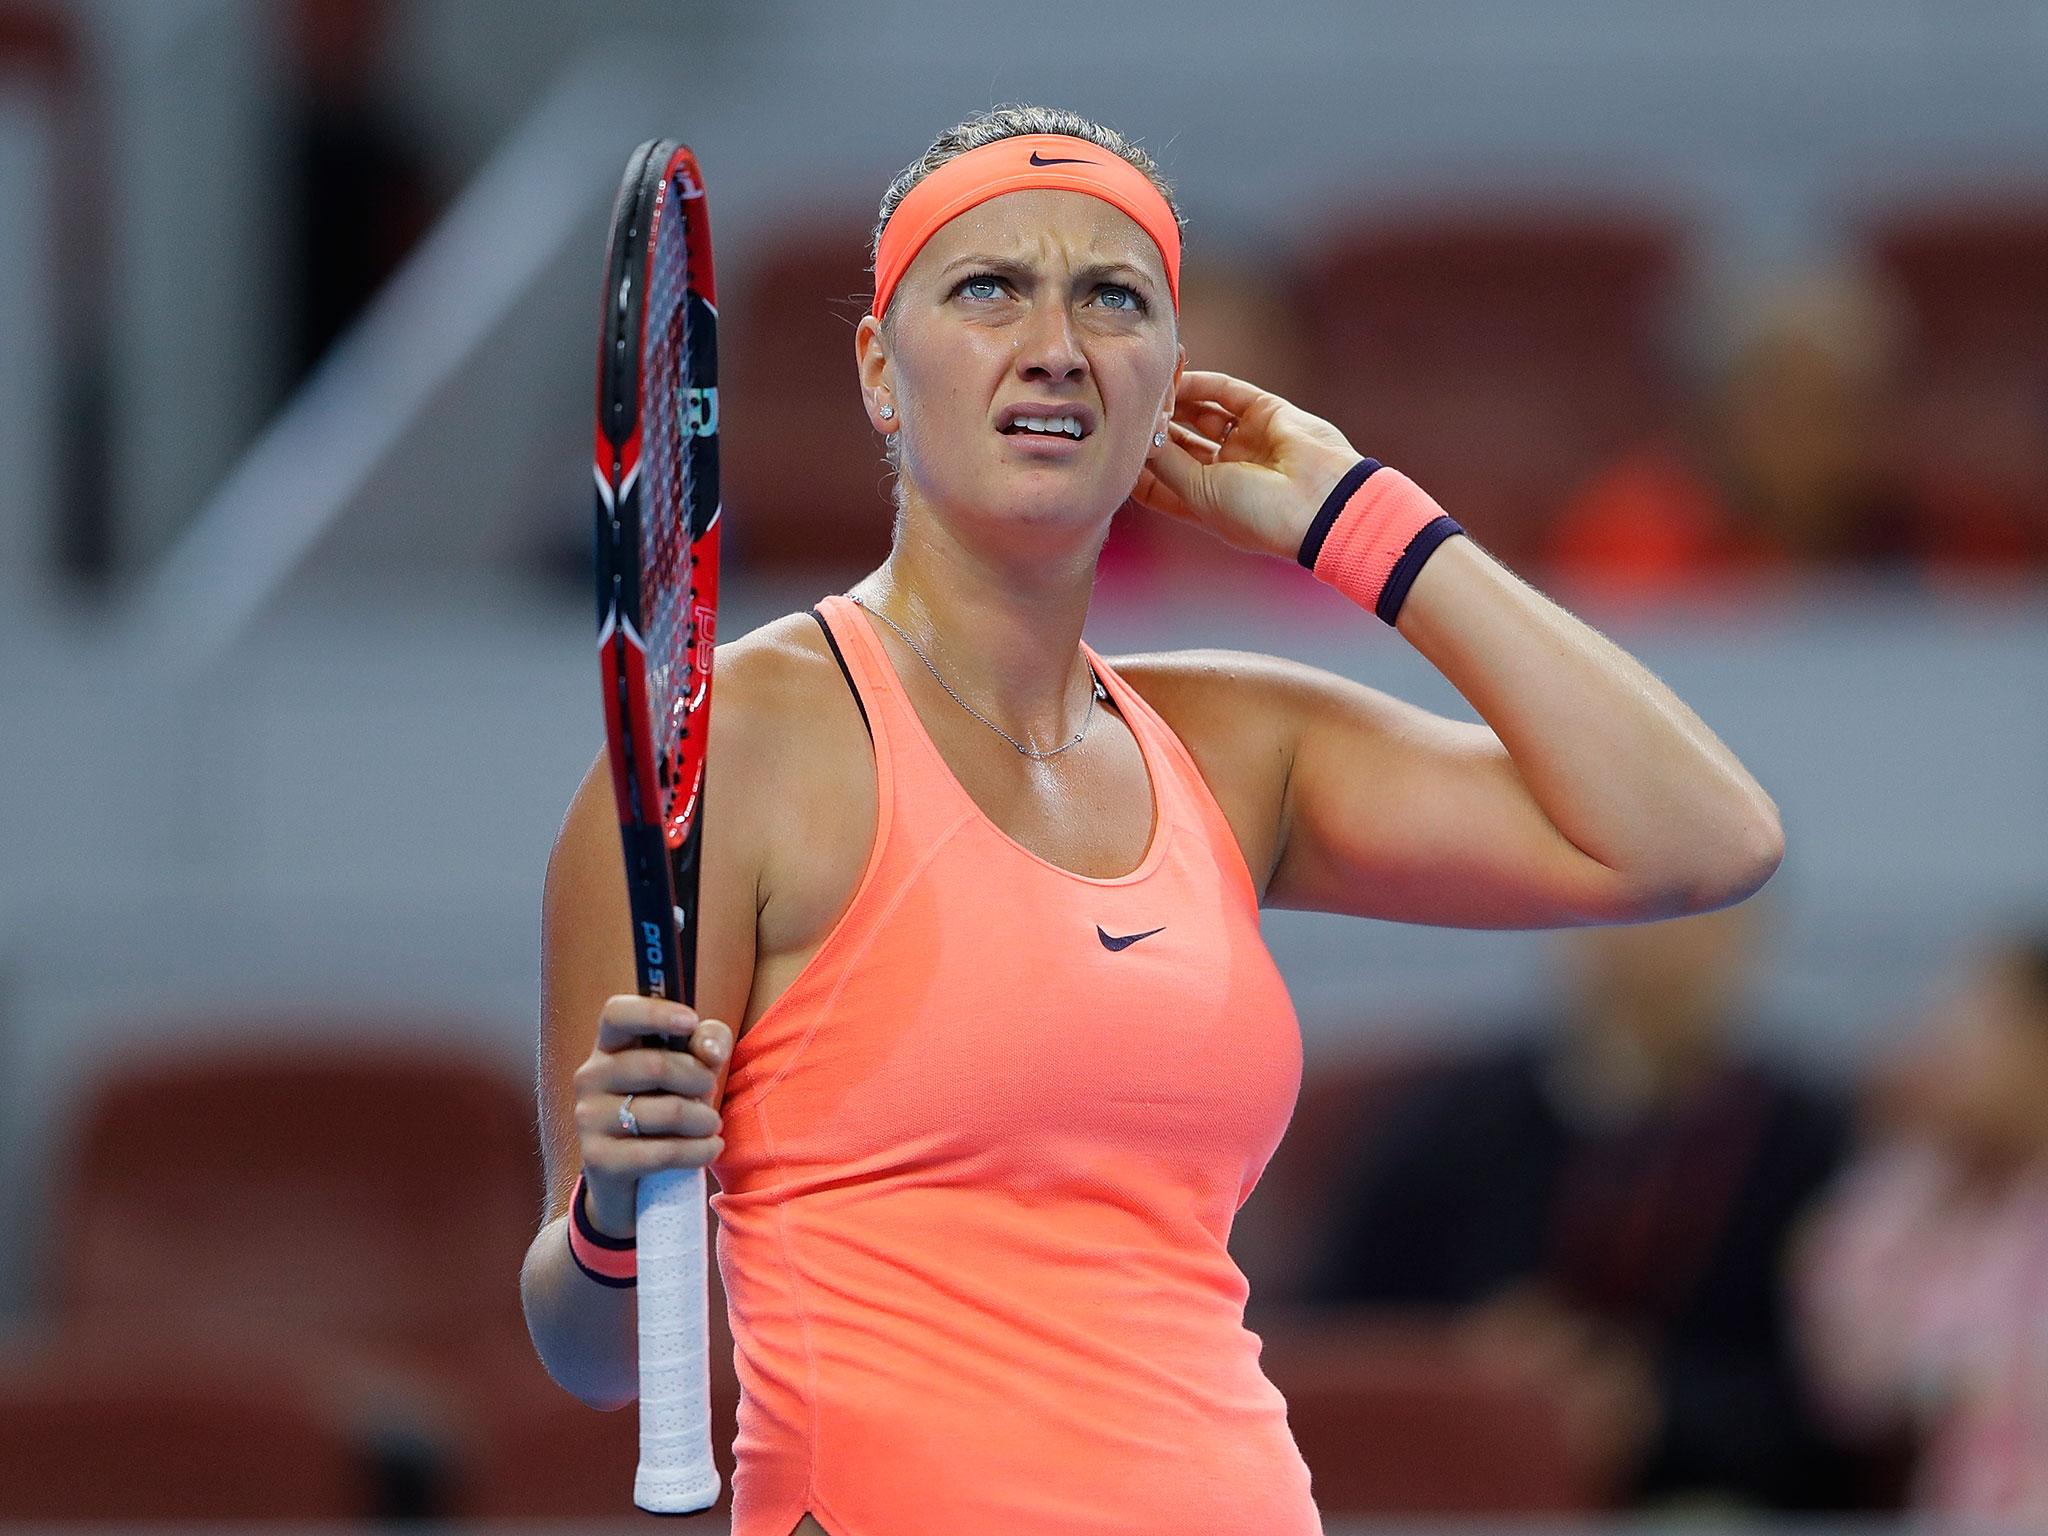 Petra Kvitova was attacked in what was described as a burglary